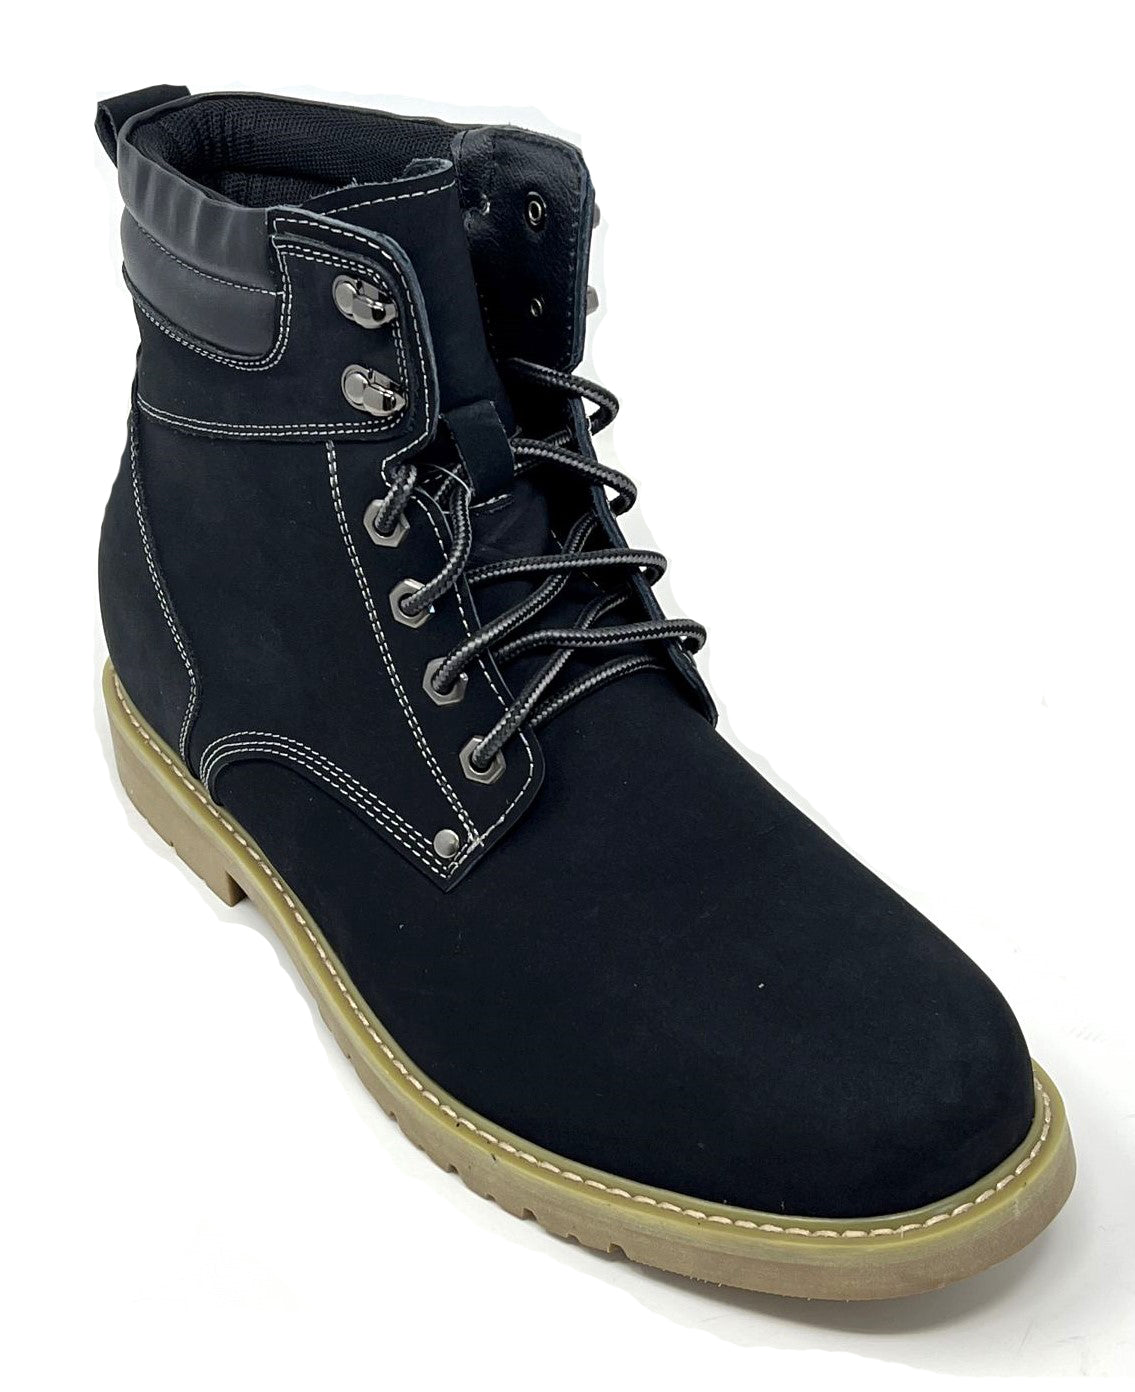 FSP0115 - 3.2 Inches Taller (Black) - Size 11.5 Only